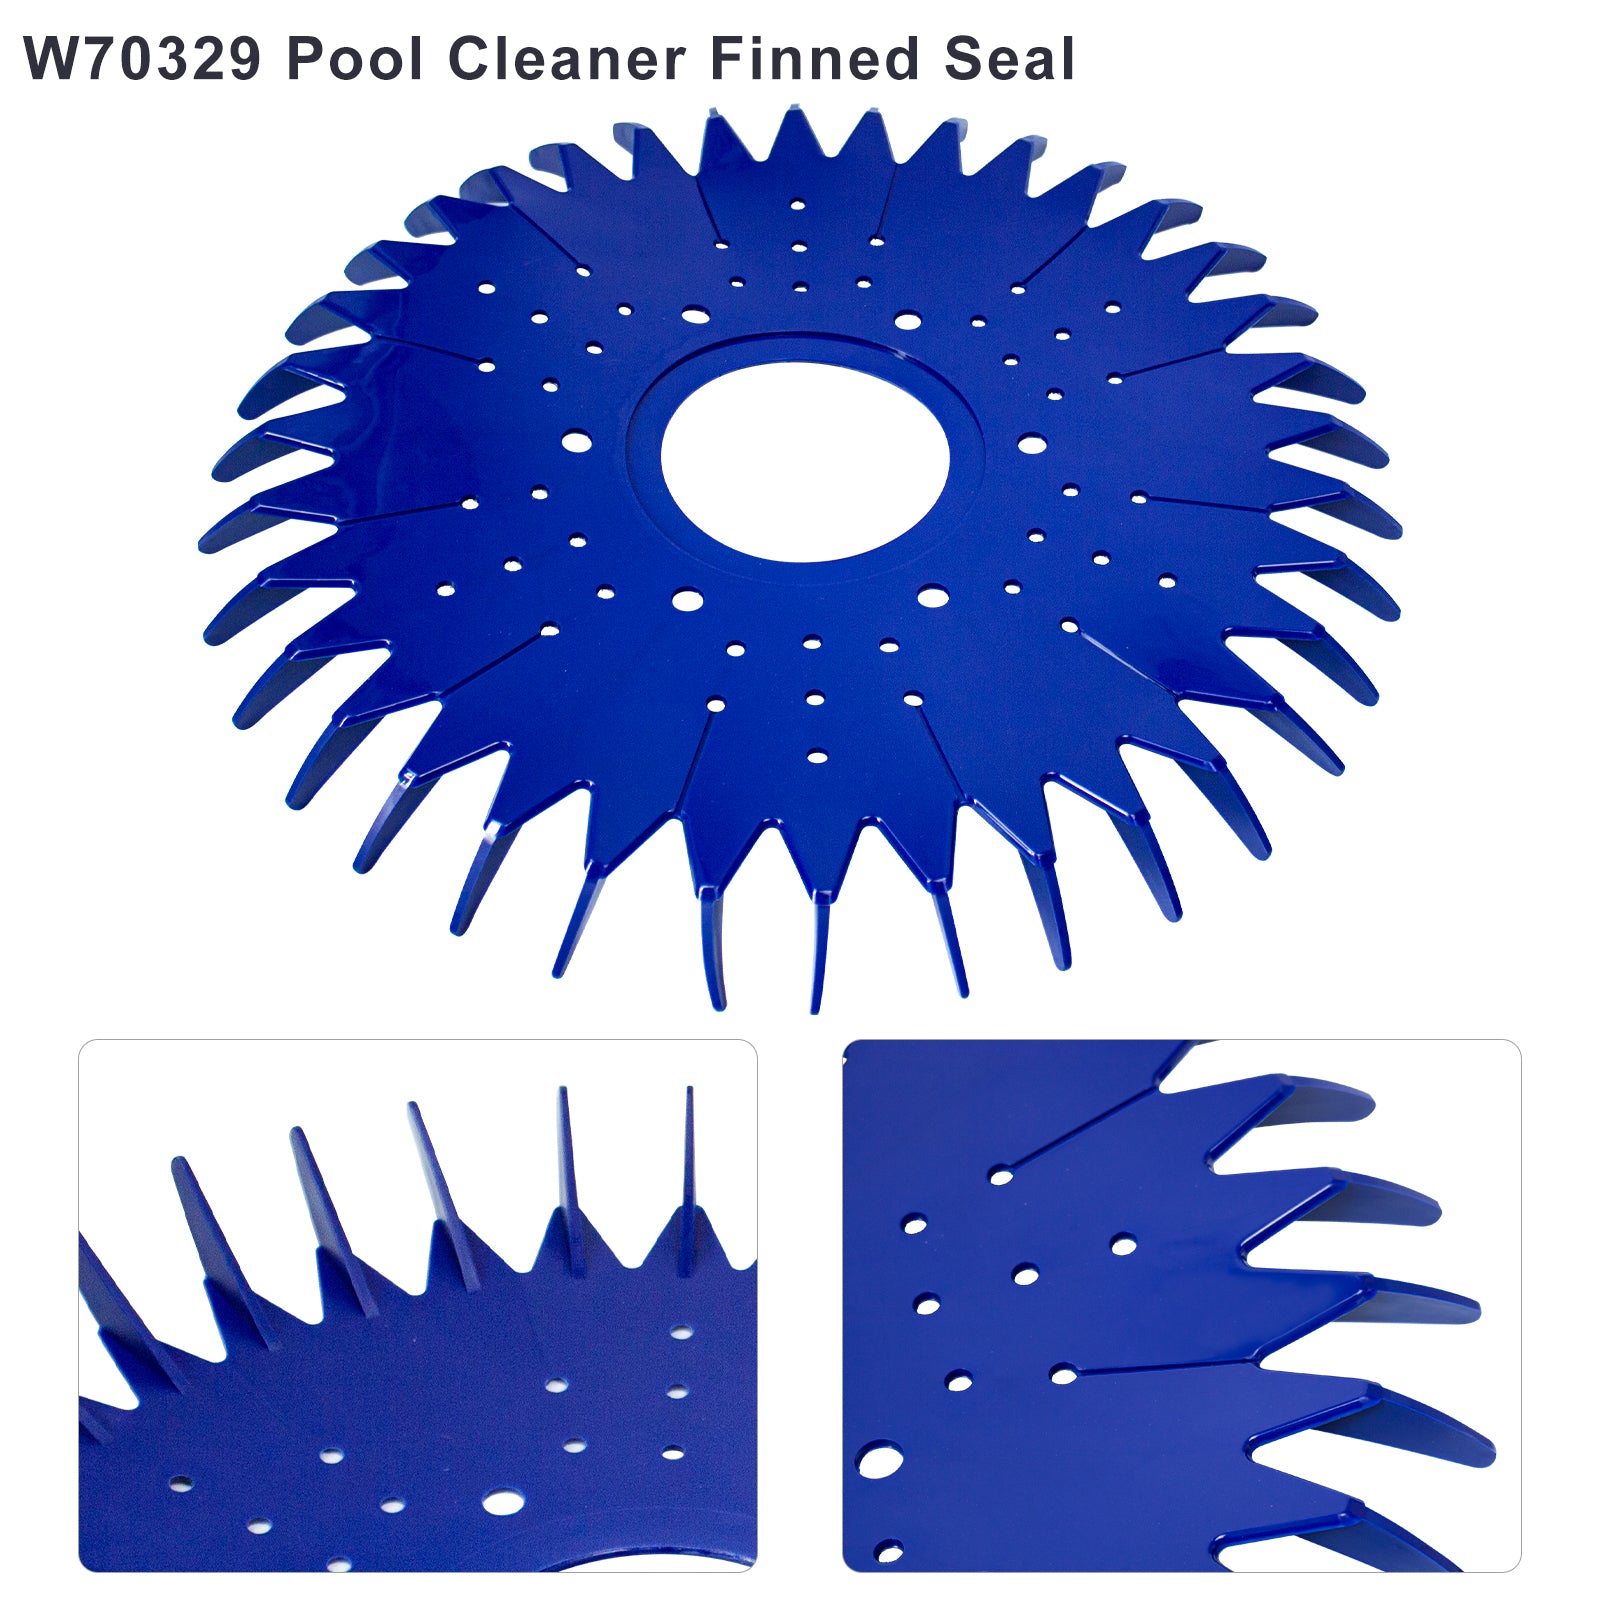 S-Union W70329 Finned Seal/Disc/Skirt & W69698 Pool Cleaner Diaphragm & W70327 Foot Pad Pool Cleaner Replacement Parts for Zodiac Baracuda G2, G3, G4, Alpha 2, 3